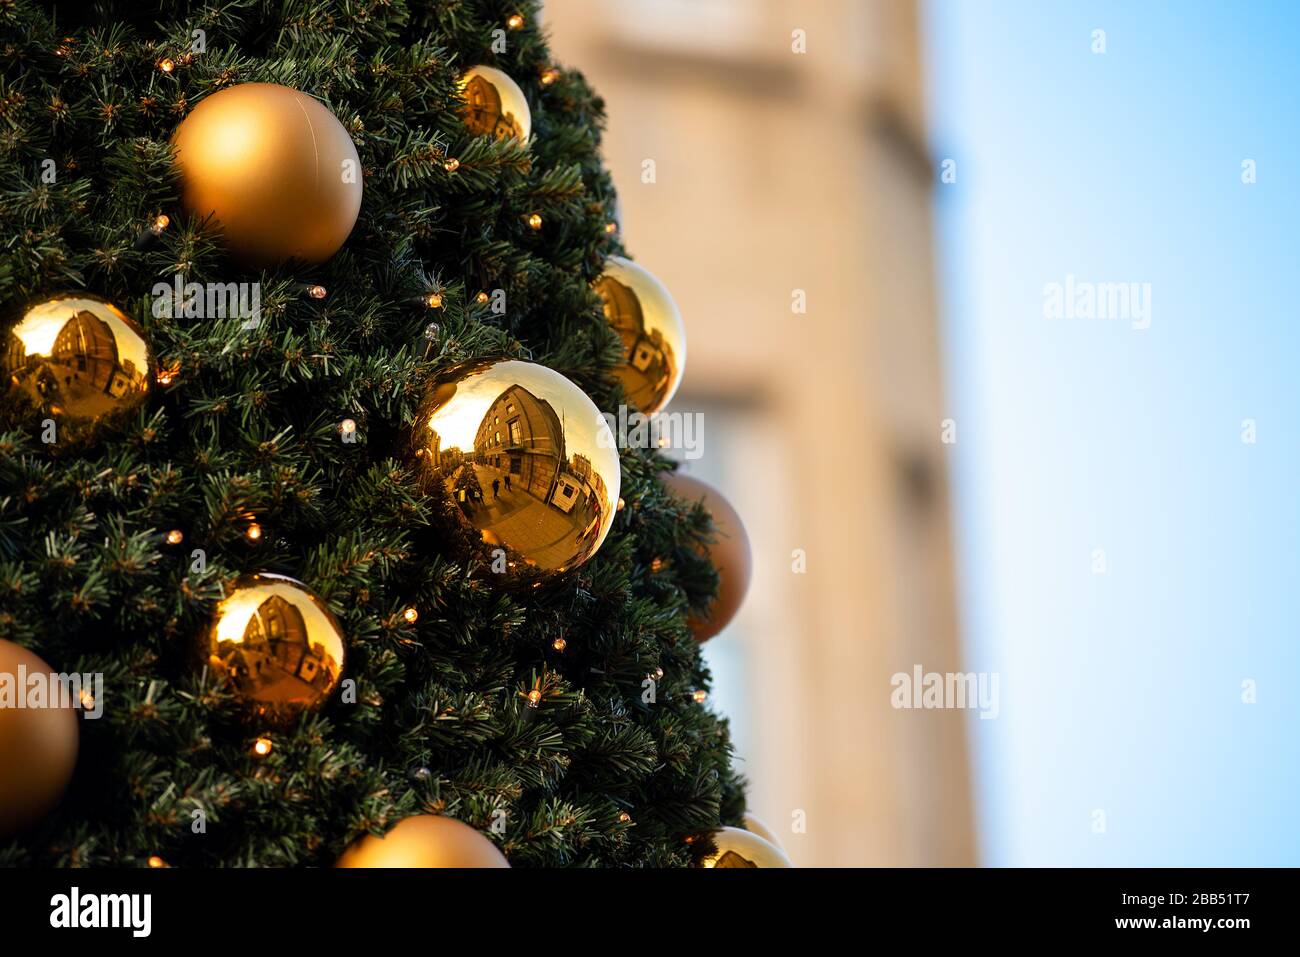 Golden decorative baubles hanging in a Christmas tree reflect the surround outdoor buildings. Stock Photo